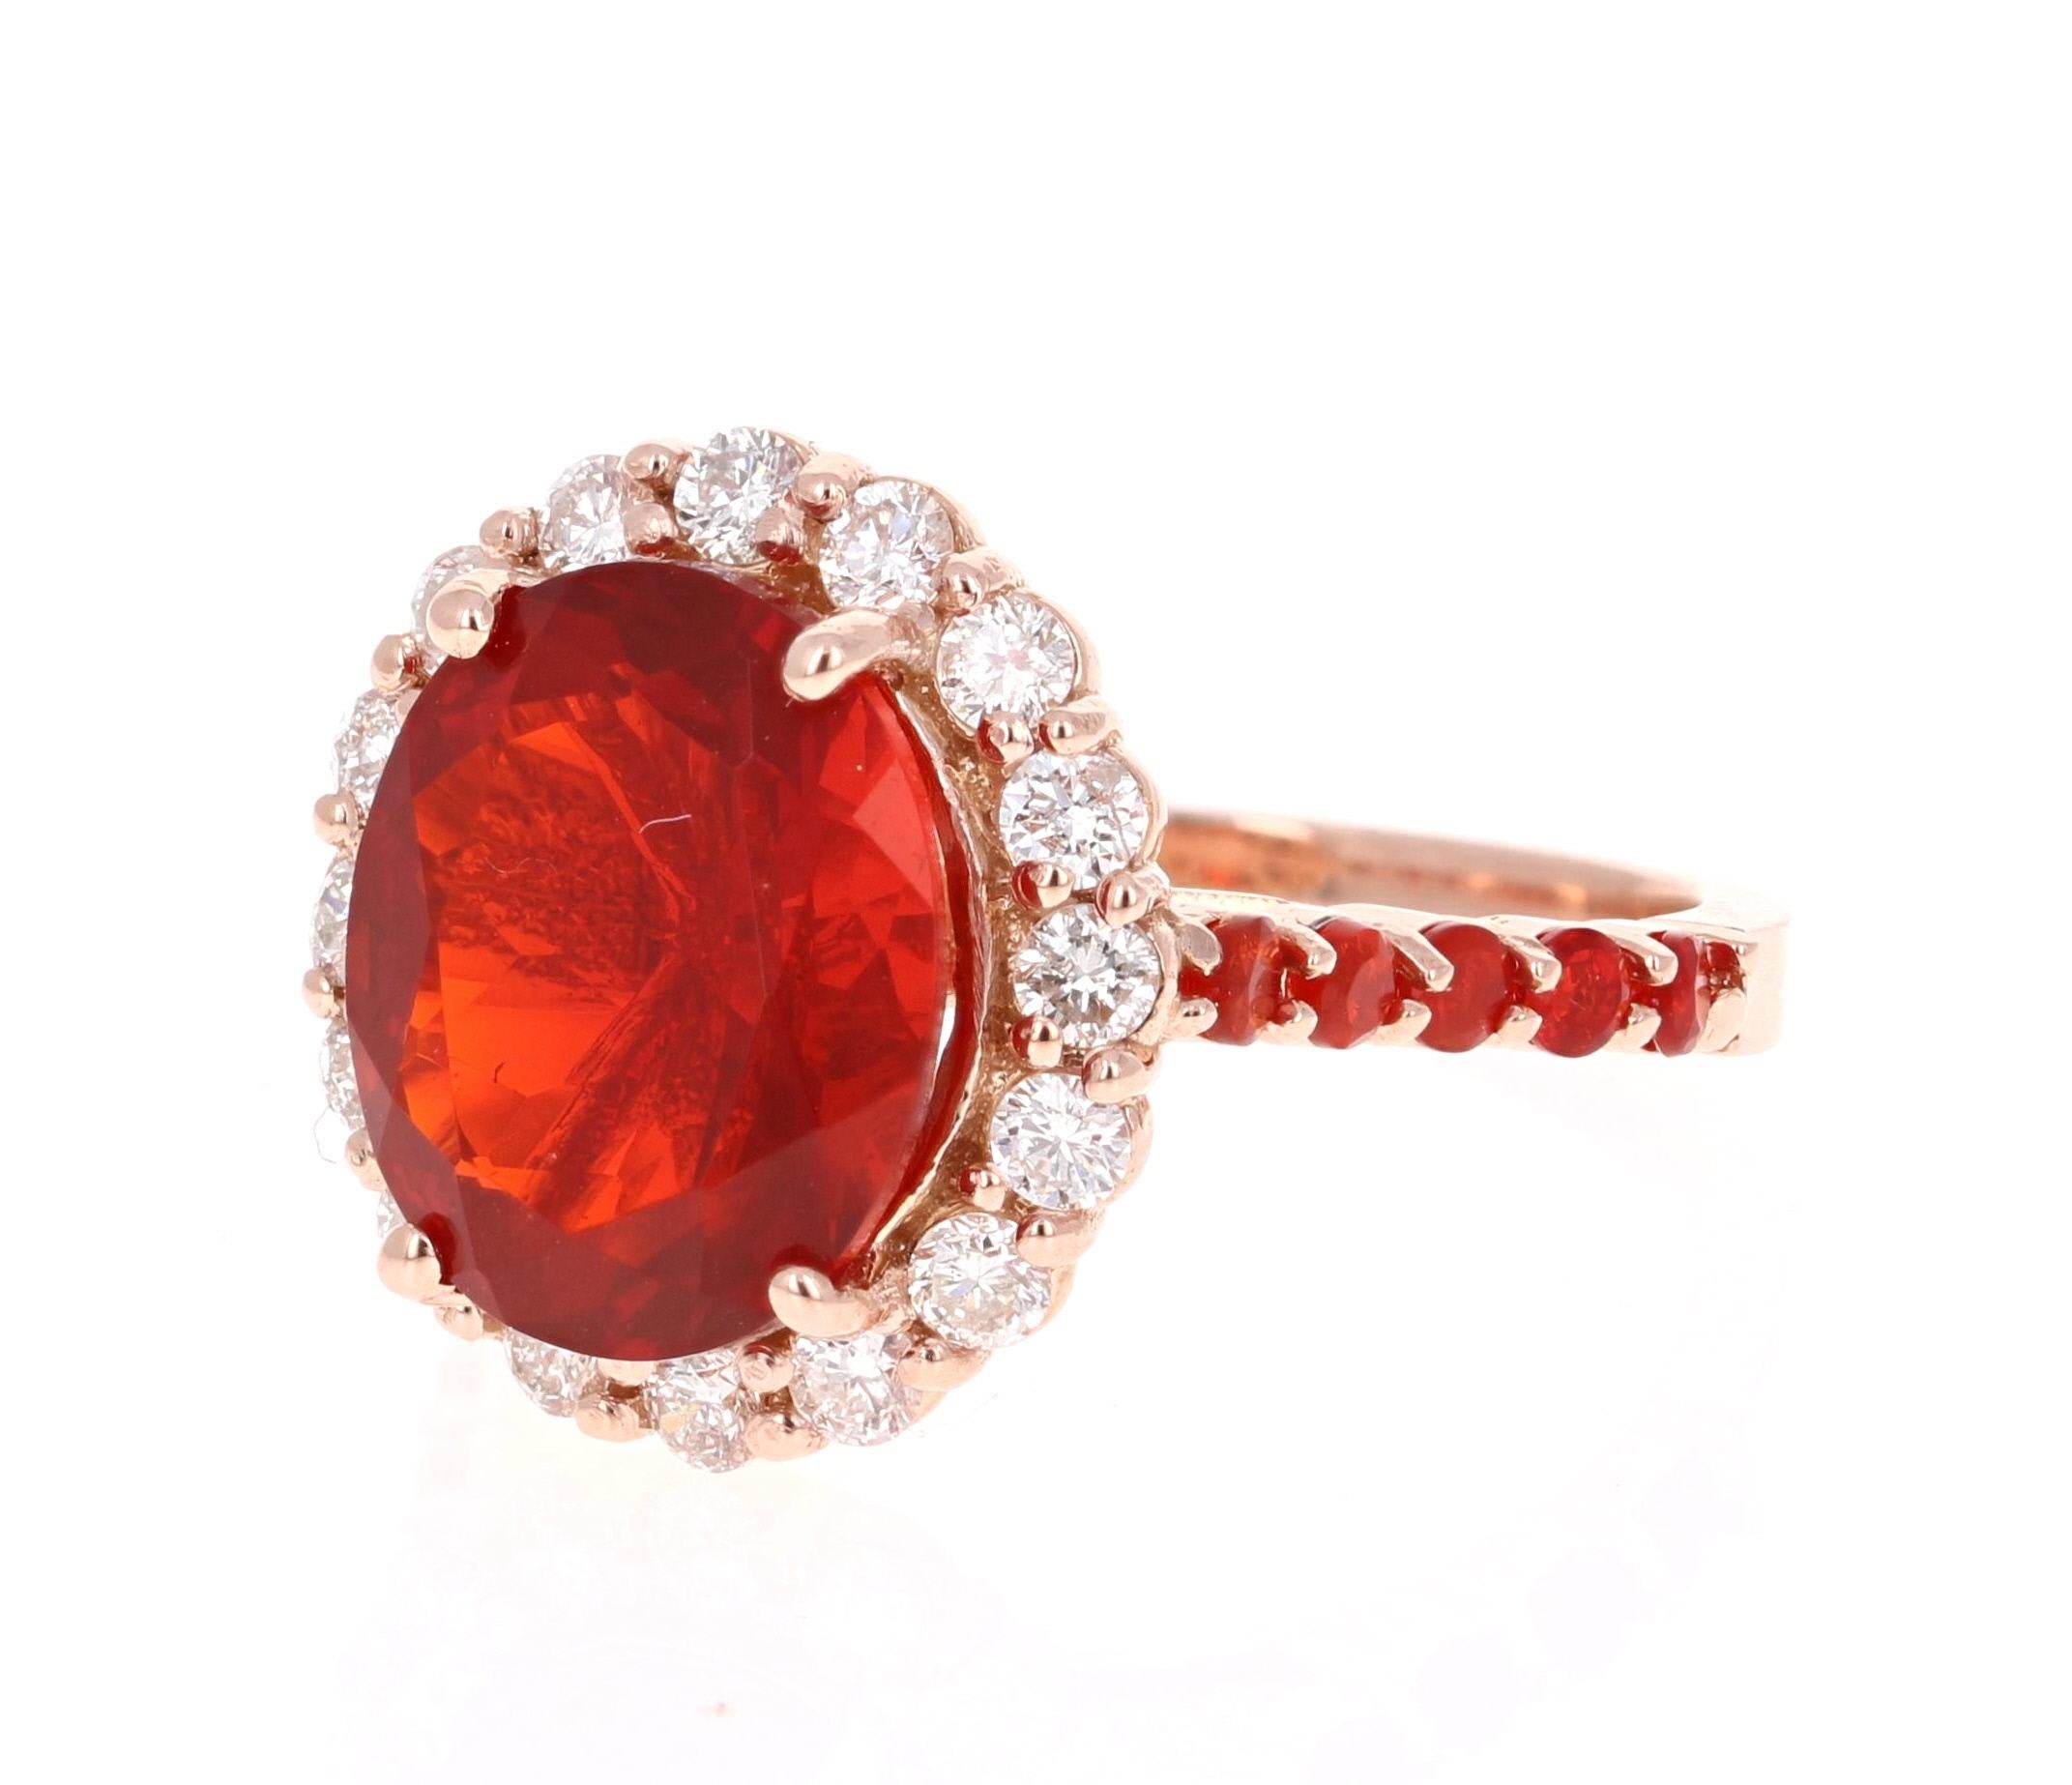 Beautiful Fire Opal and Diamond Ring. This ring has a 3.34 carat Oval Cut Fire Opal in the center of the ring and is surrounded by a halo of 18 Round Cut Diamonds that weigh a total of 0.68 carats and there are 10 Round Cut Fire Opals along the